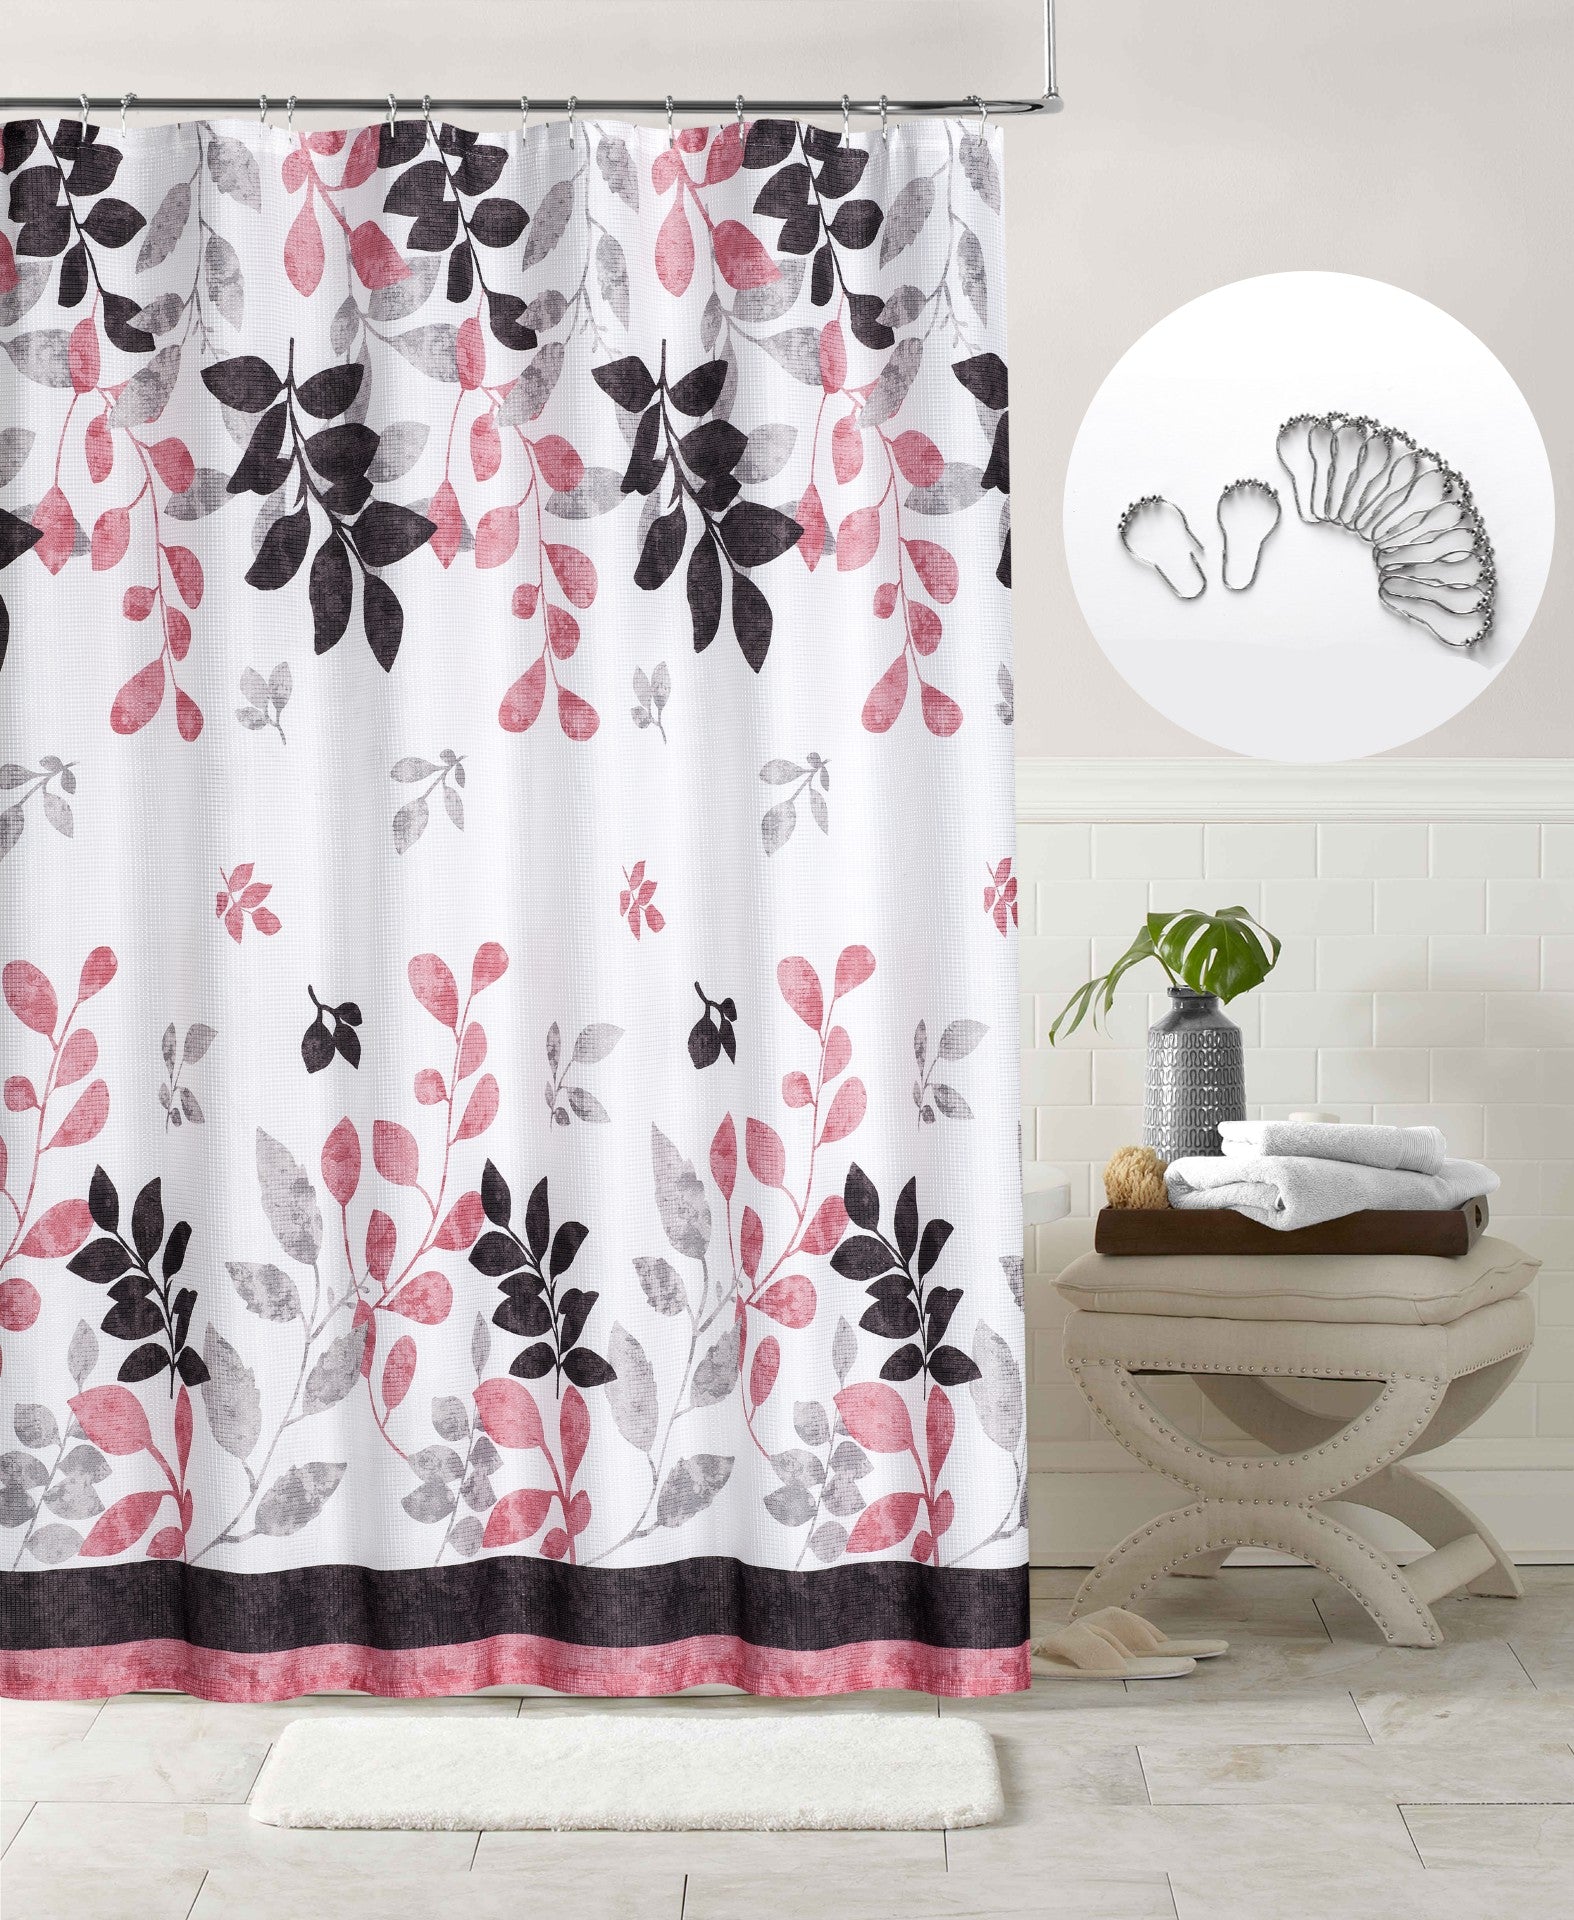 Dainty Home Printed Waffle 3D Textured Waffle Weave Leaves Designed Fabric Shower Curtain with 12 Roller Ball Hooks Included 70" x 72" in Black/Pink